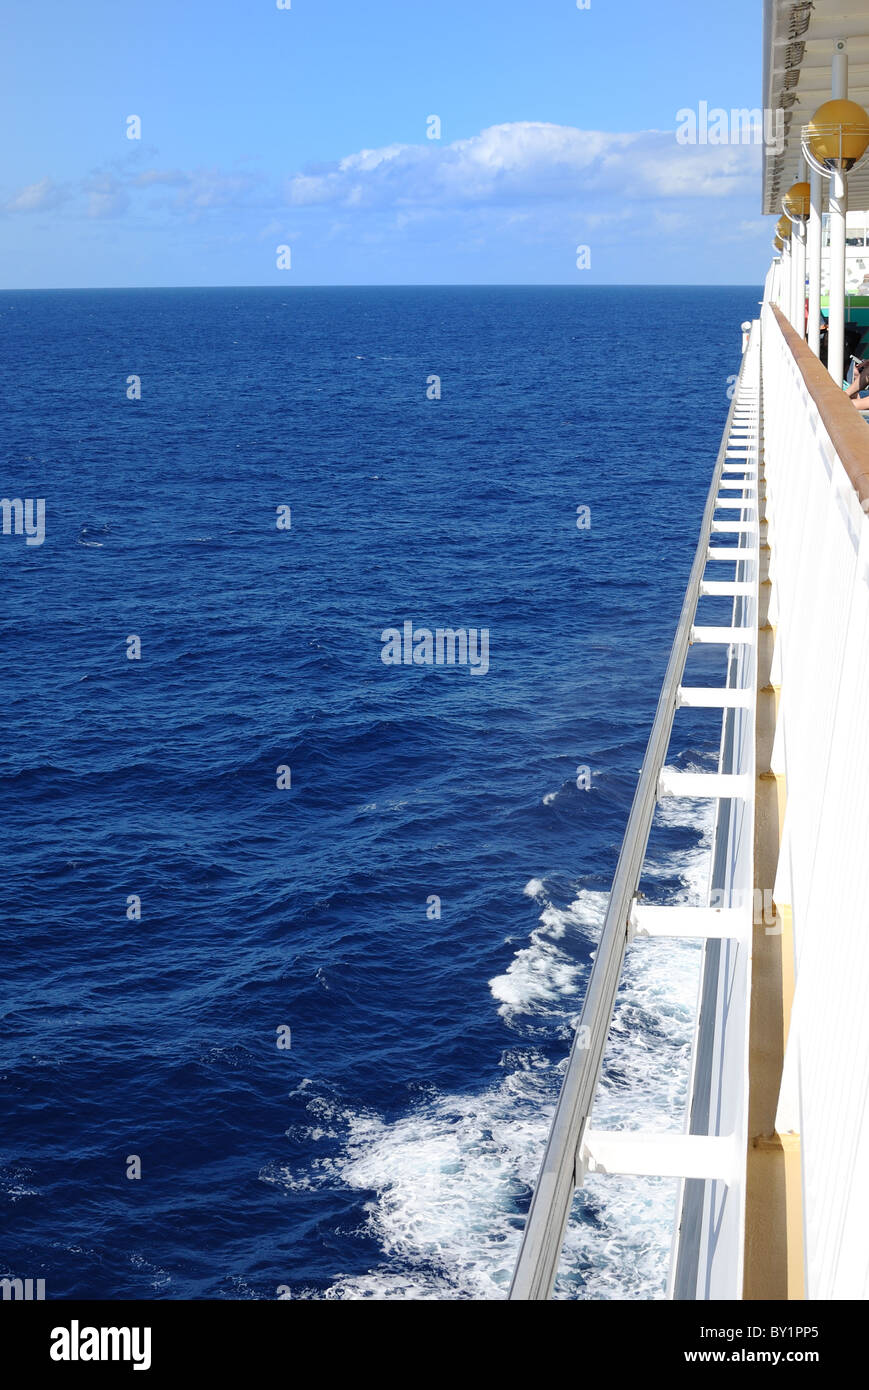 View of the ocean in the Caribbean from a cruise ship. Stock Photo